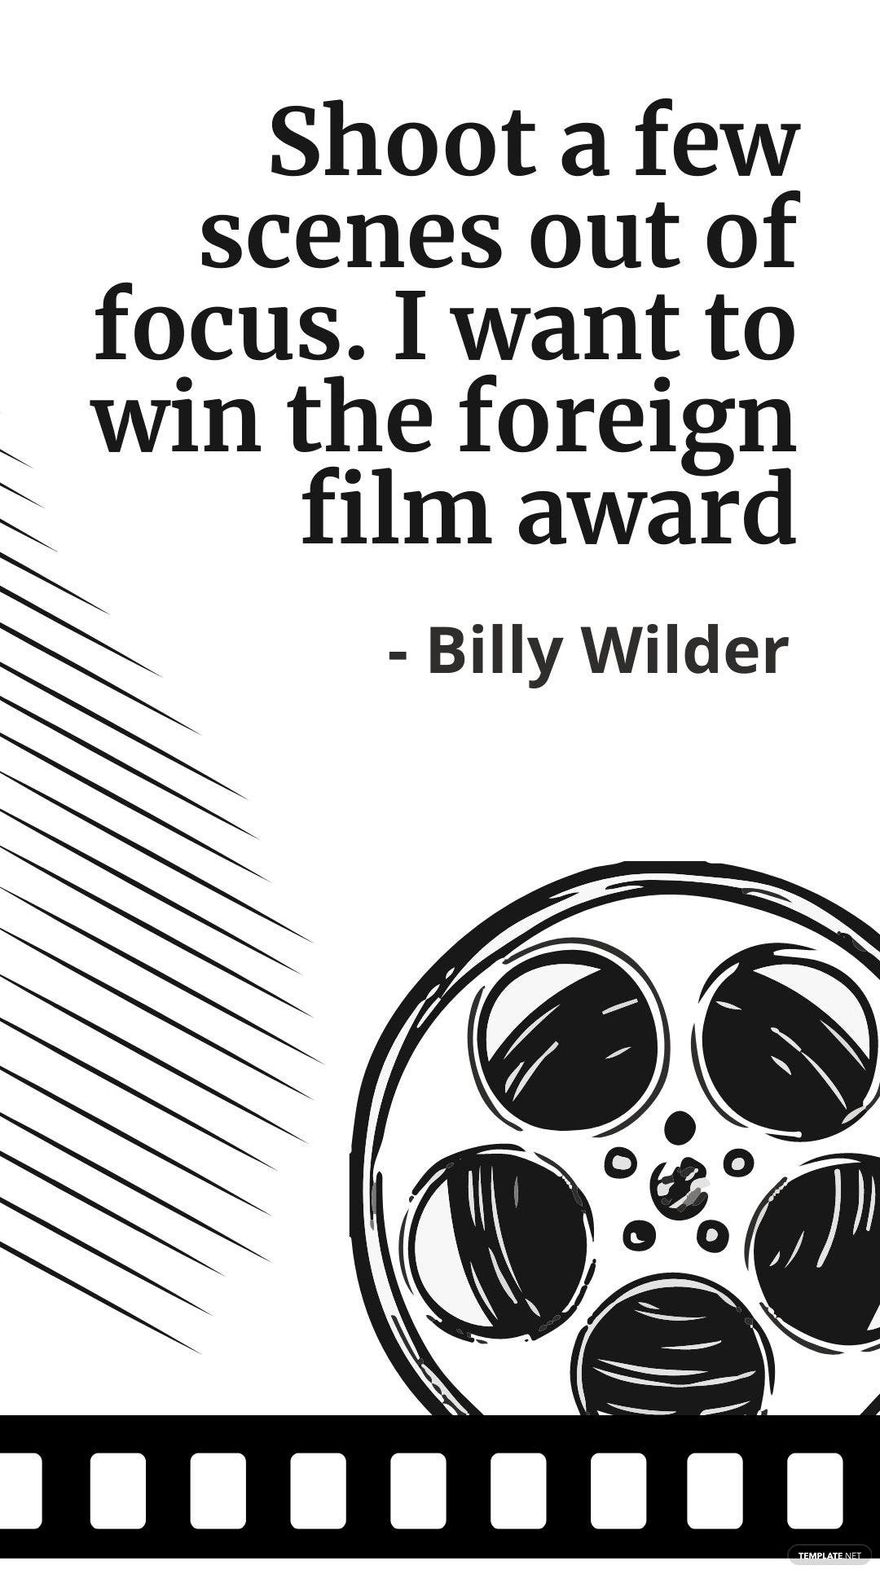 Billy Wilder - Shoot a few scenes out of focus. I want to win the foreign film award